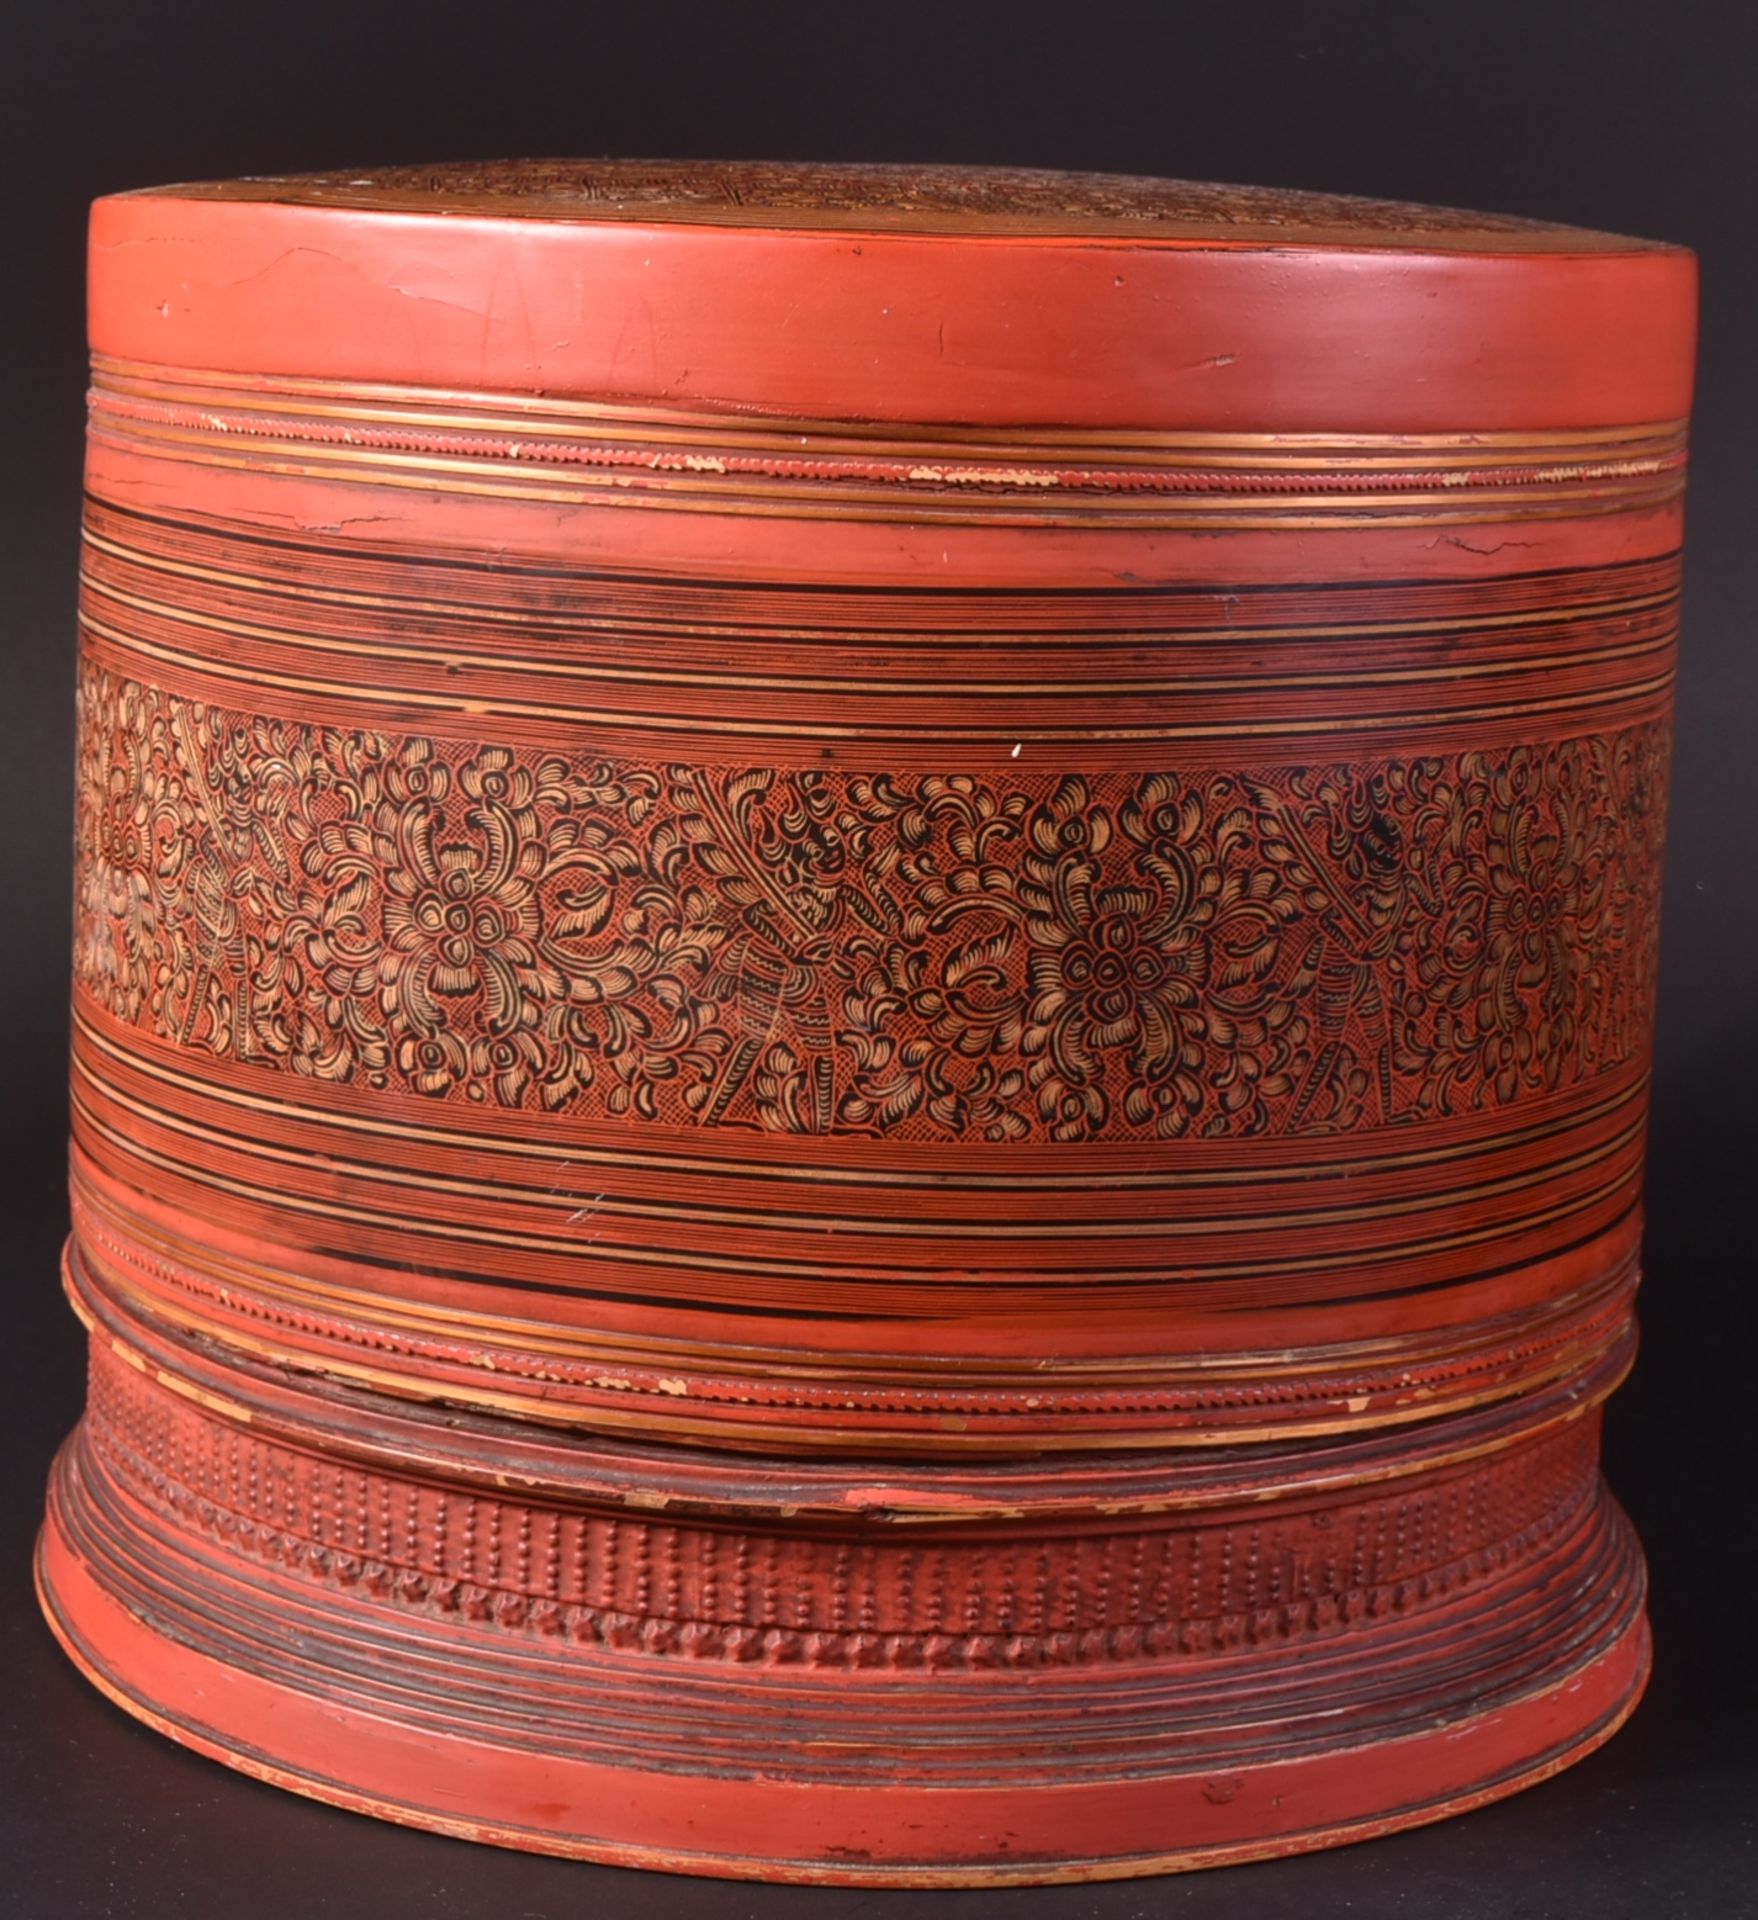 EARLY 20TH CENTURY BURMESE LACQUER BETEL BOX